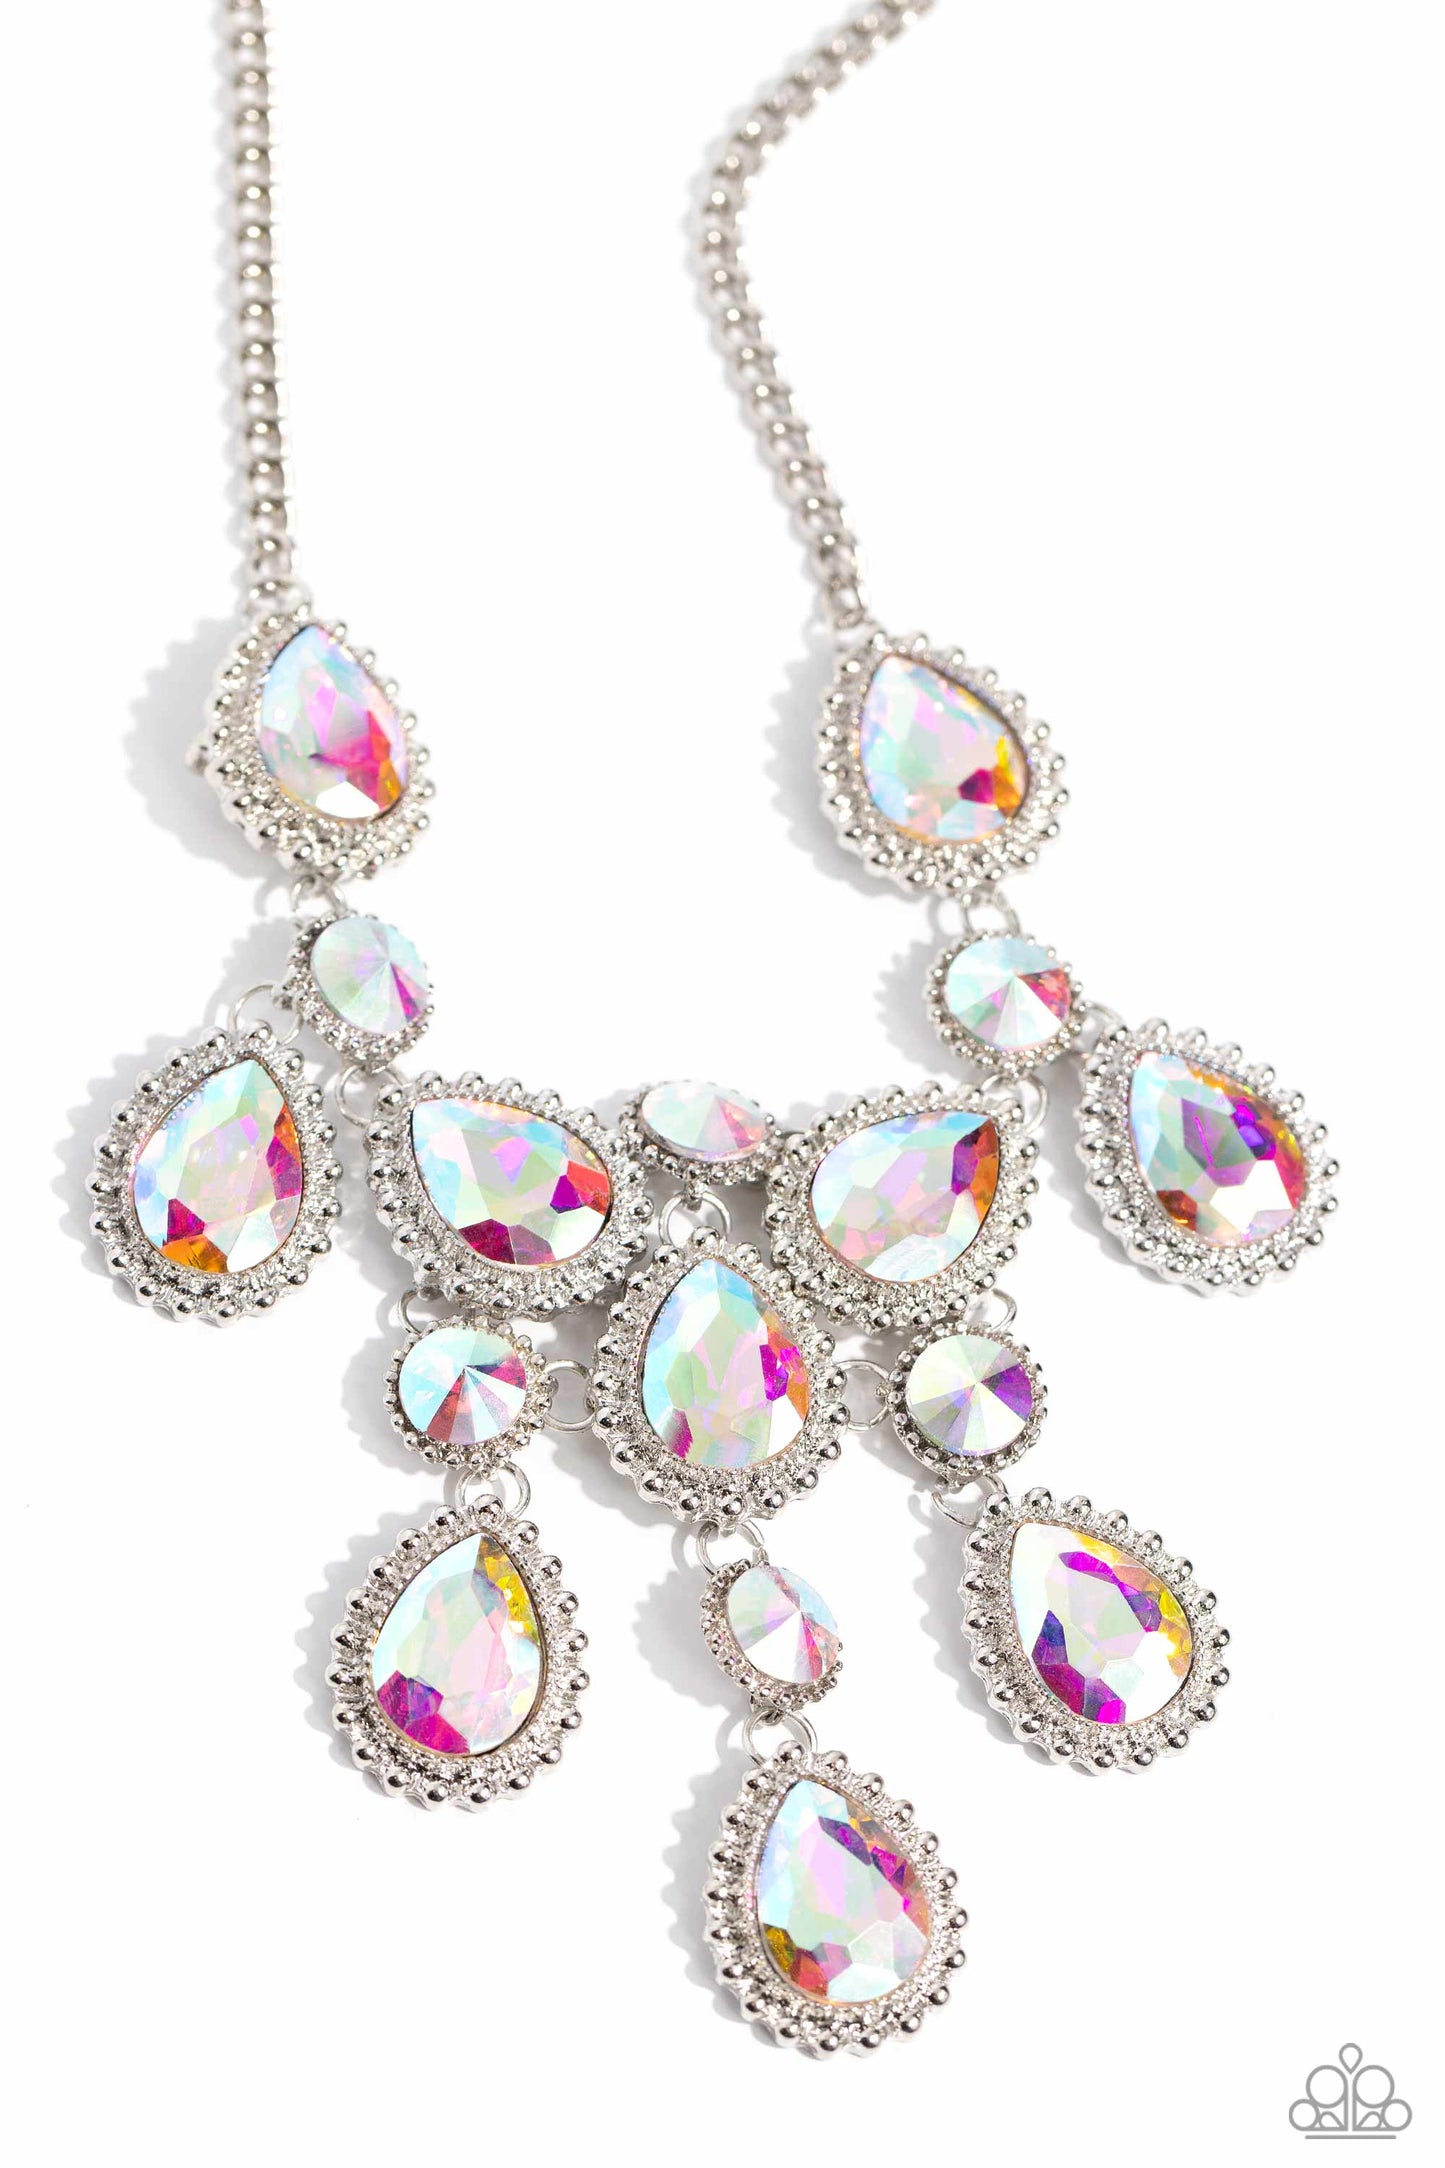 Paparazzi Accessories - Dripping in Dazzle - December 2023 Life of the Party Multi Necklaces an explosion of round, teardrop, and marquise-cut gems in varying sizes bordered by tactile silver studs cluster together to create a glittery iridescent showcase down the neckline. Featuring various shades of iridescence, each gem reflects light off of its faceted surface emitting further glitz and glam. Features an adjustable clasp closure. Due to its prismatic palette, color may vary.